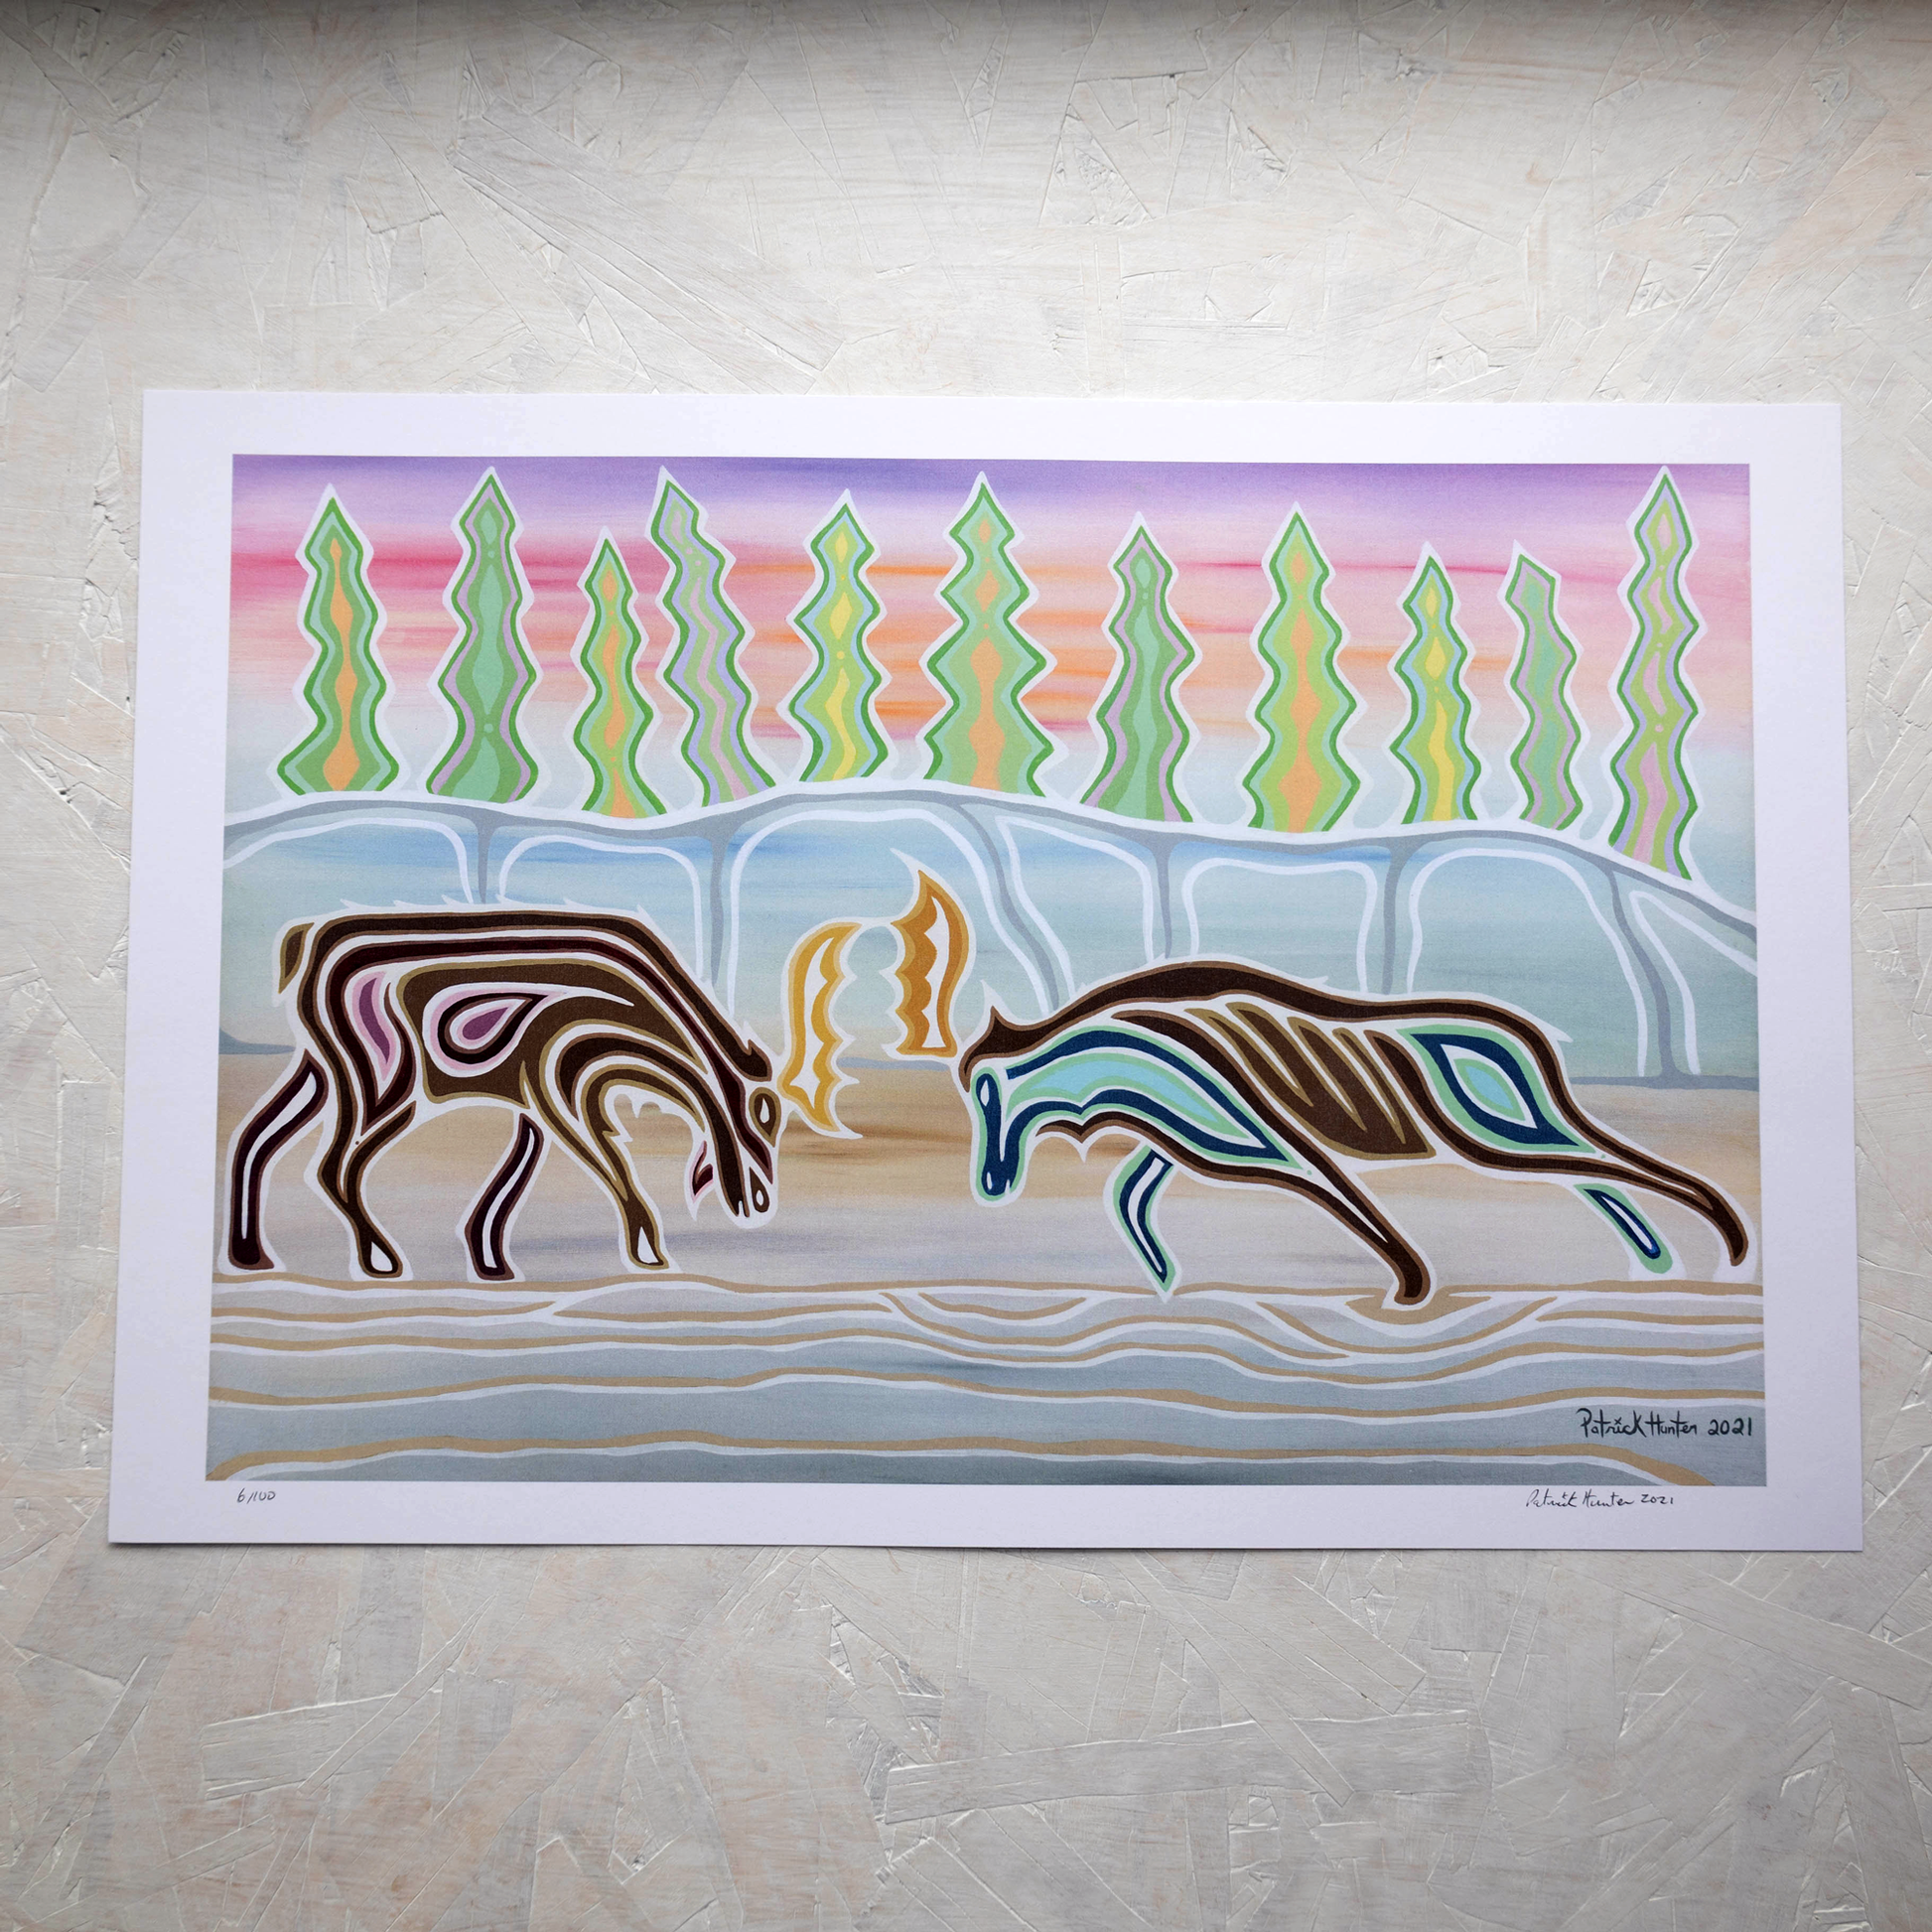 Print of Patrick Hunter's painting of two moose dueling, woodland art style.